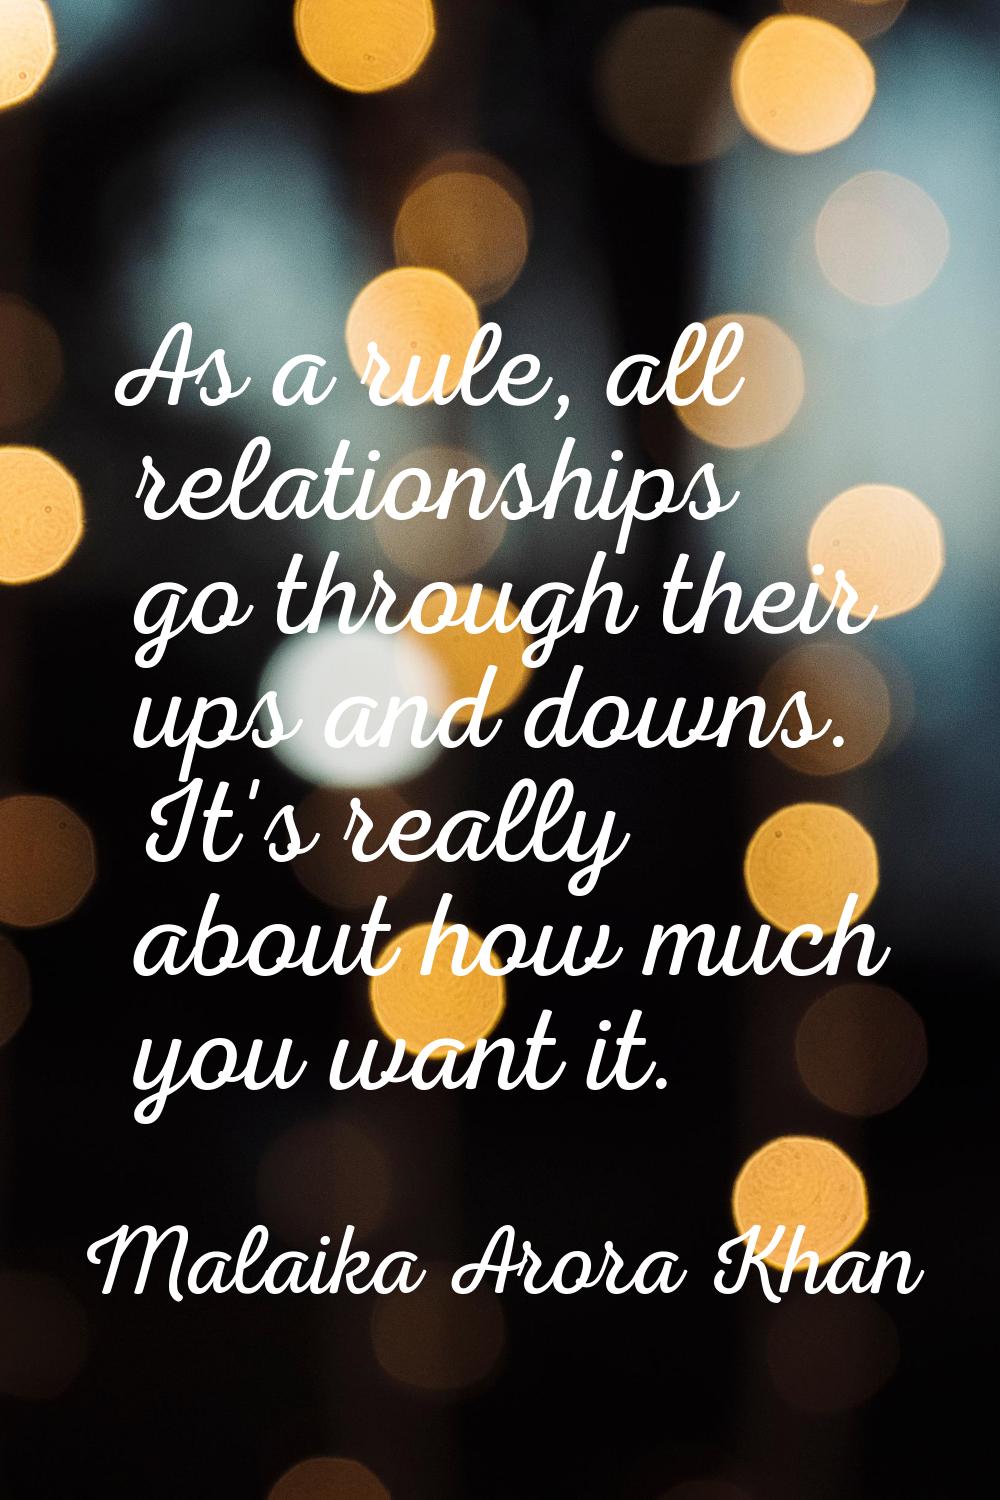 As a rule, all relationships go through their ups and downs. It's really about how much you want it